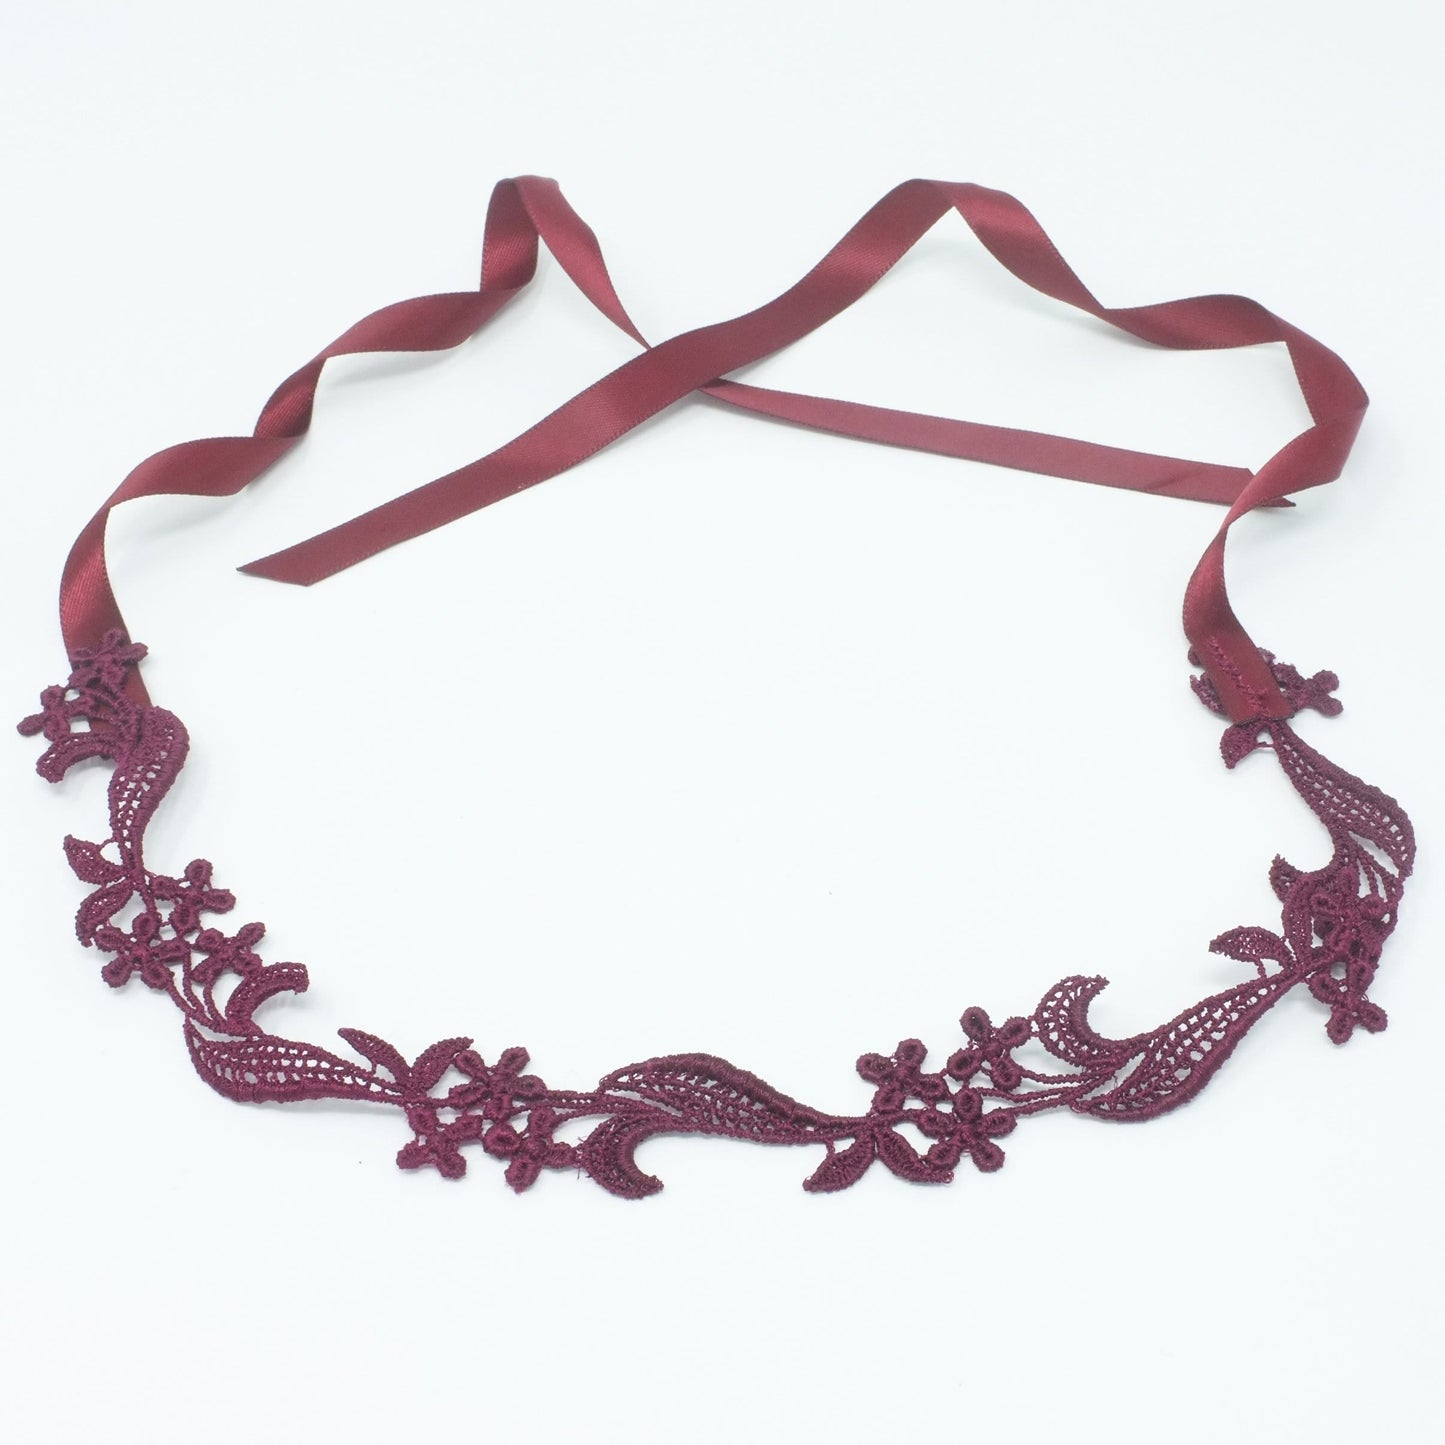 Burgundy Lace up Choker made with floral lace and satin ribbon